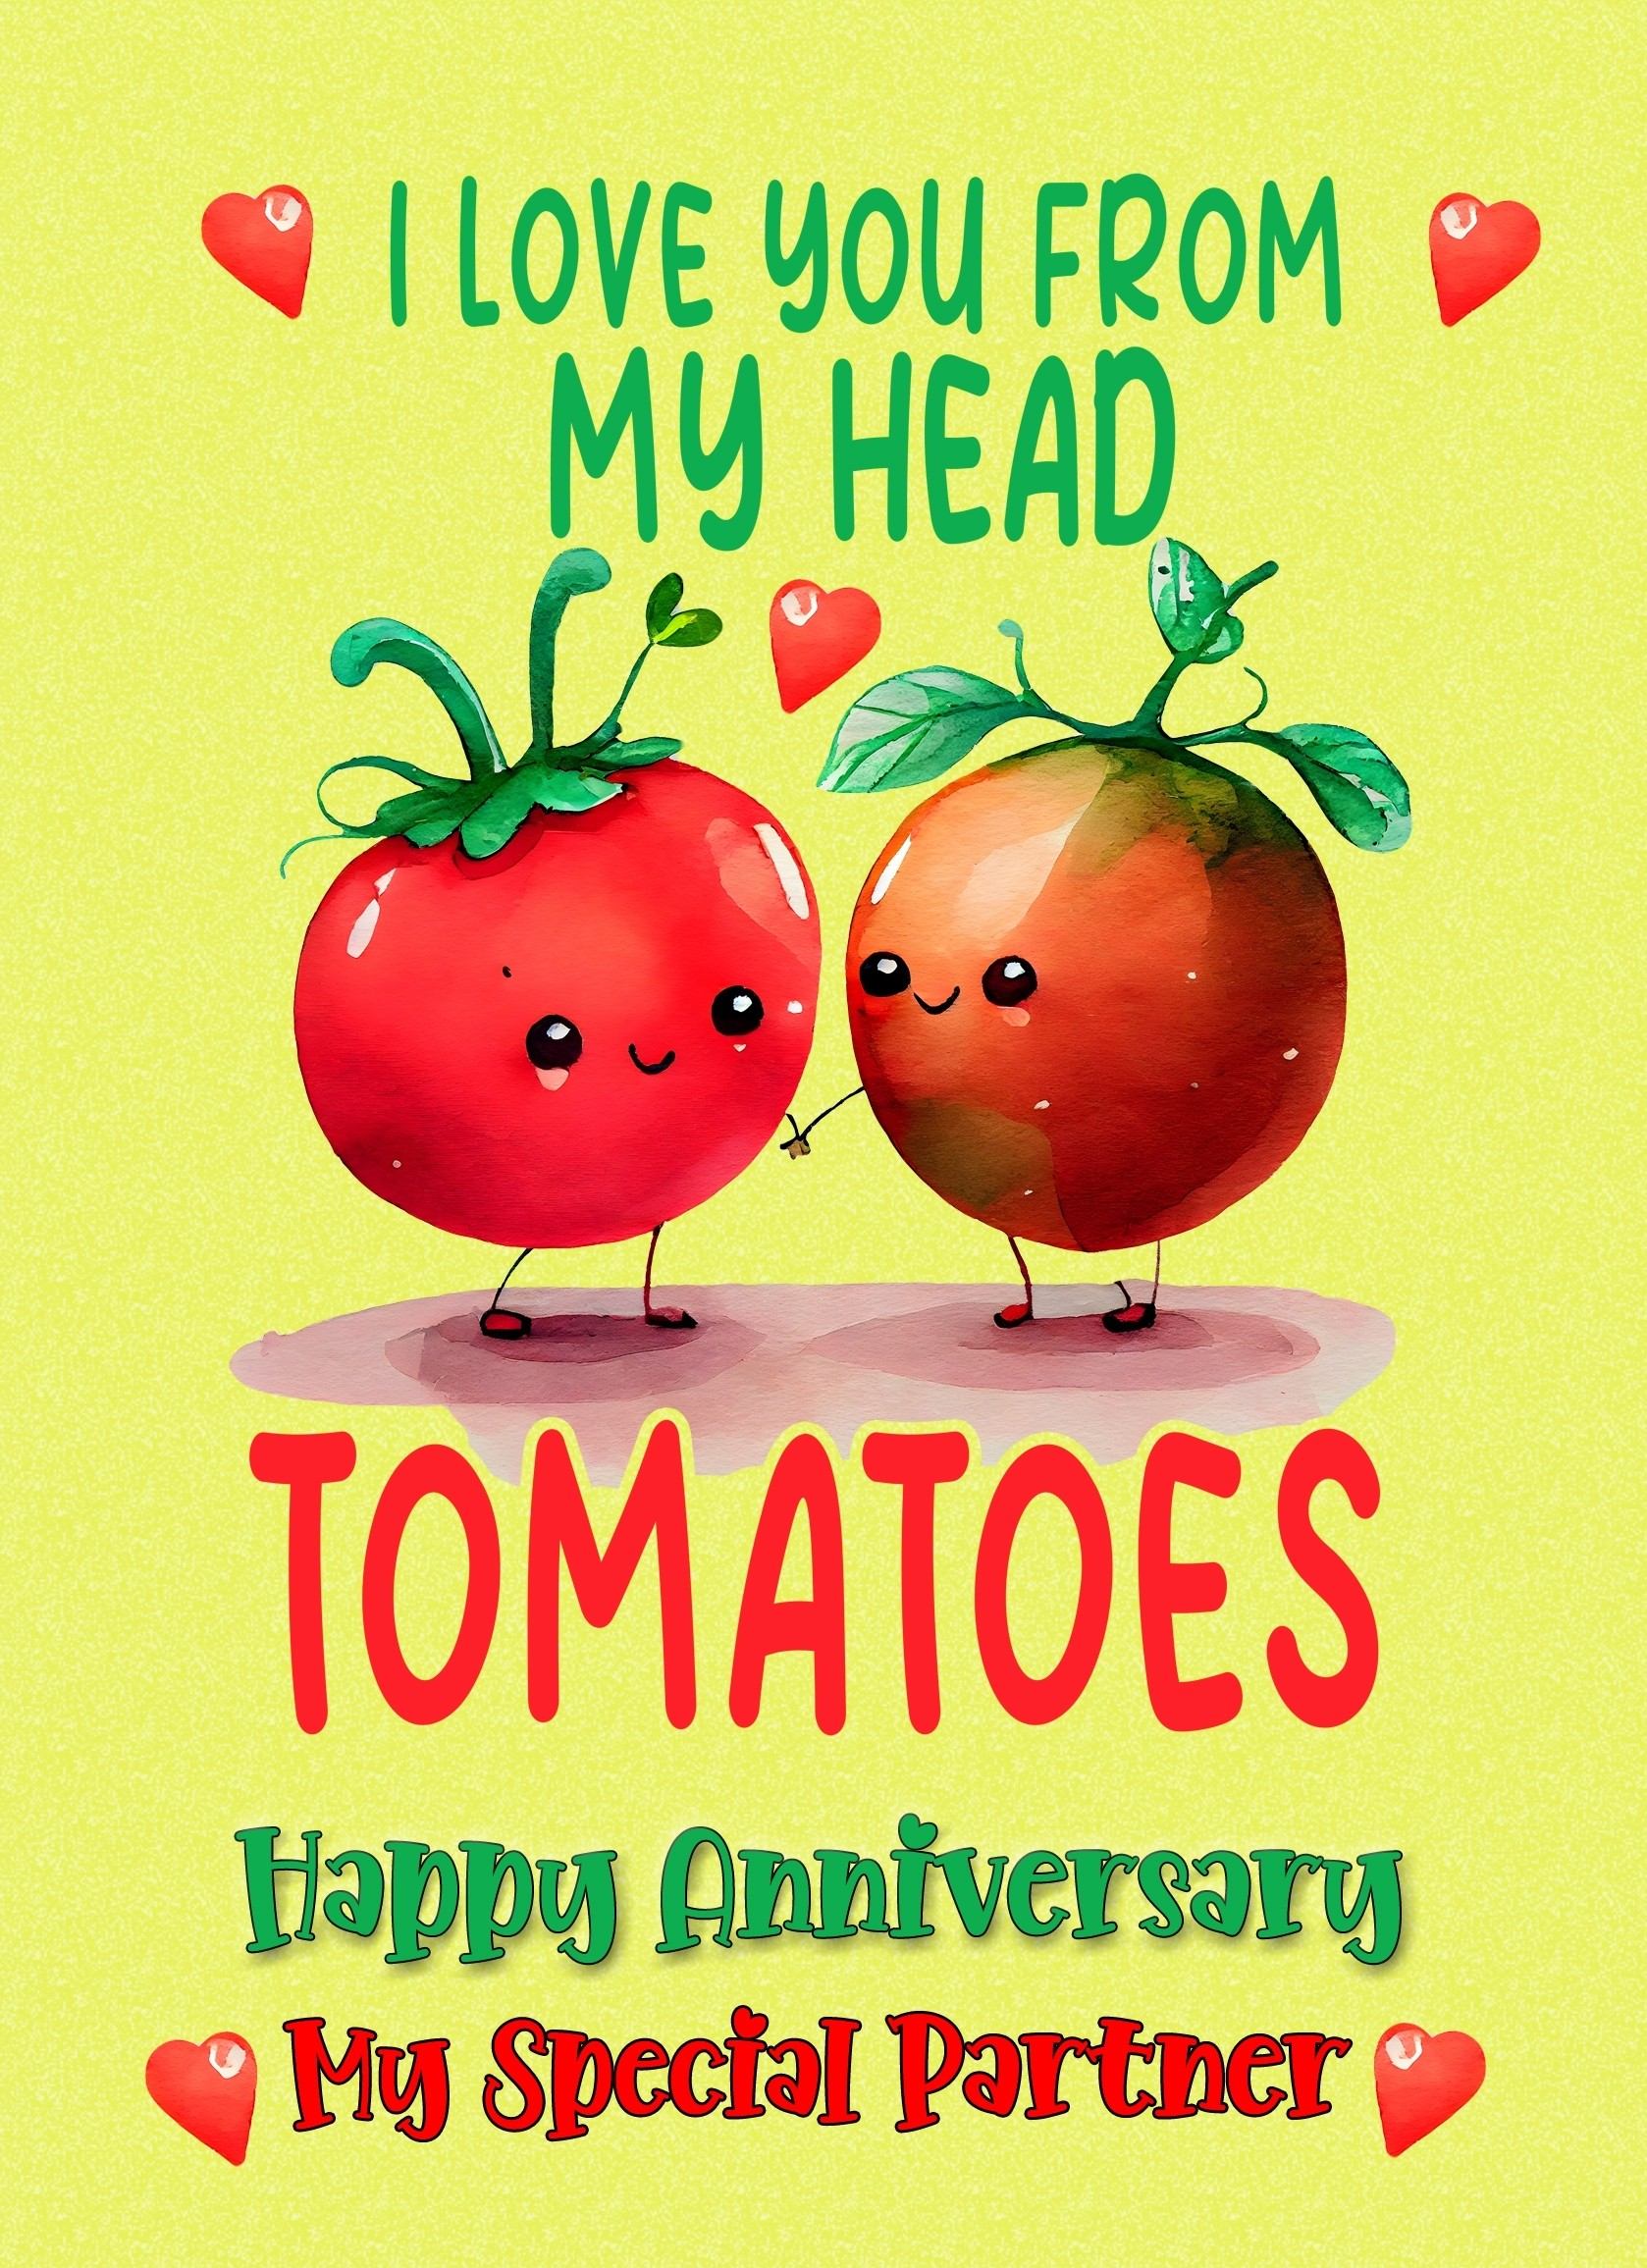 Funny Pun Romantic Anniversary Card for Partner (Tomatoes)